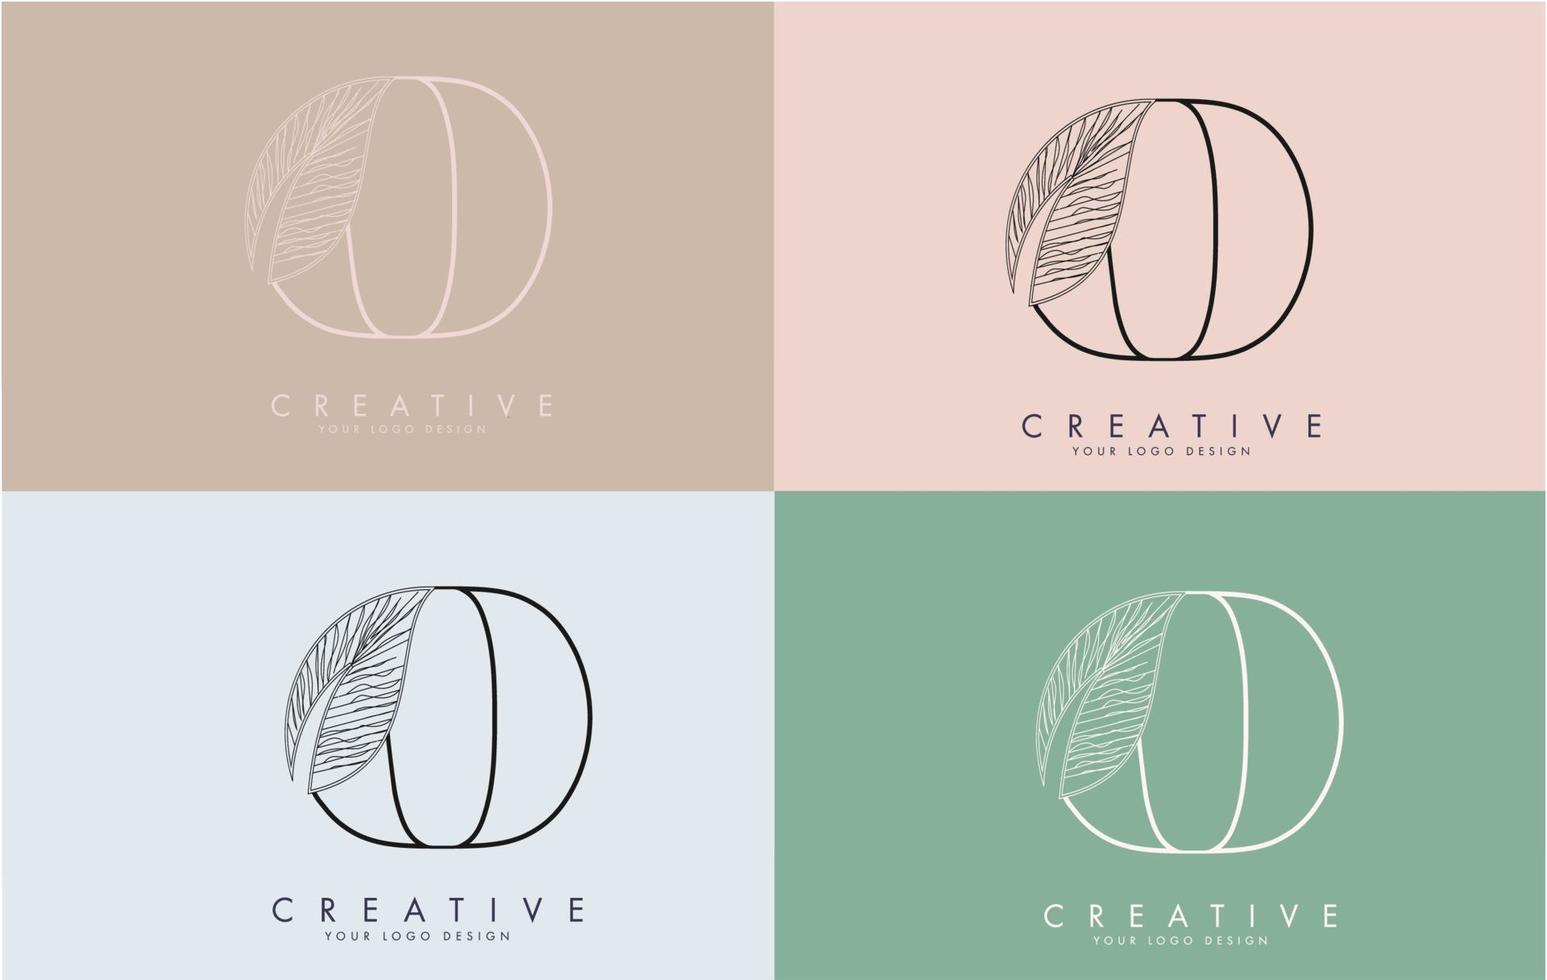 Outline Letter O Logo icon with Wired Leaf Concept Design on colorful backgrounds. vector